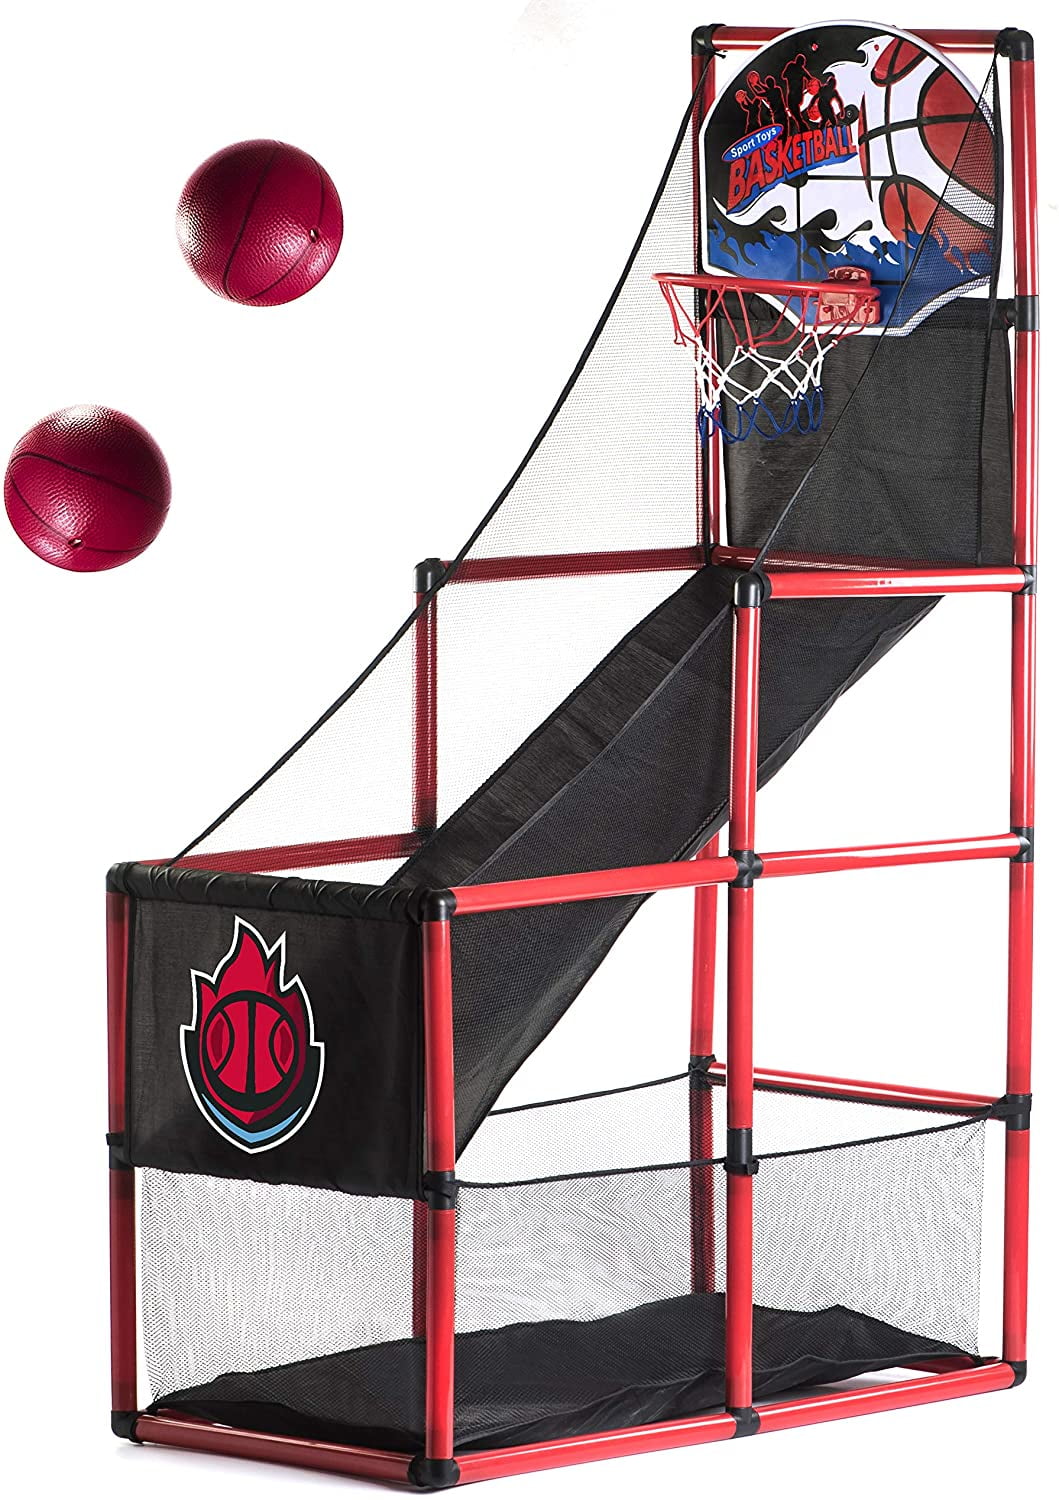 Basketball Hoop for Kids Fun and Entertaining Arcade Basketball Hoop Game by BestKidBall Basement Toys Kids Indoor Sports Toys Basketball Game with Hoop Training System 